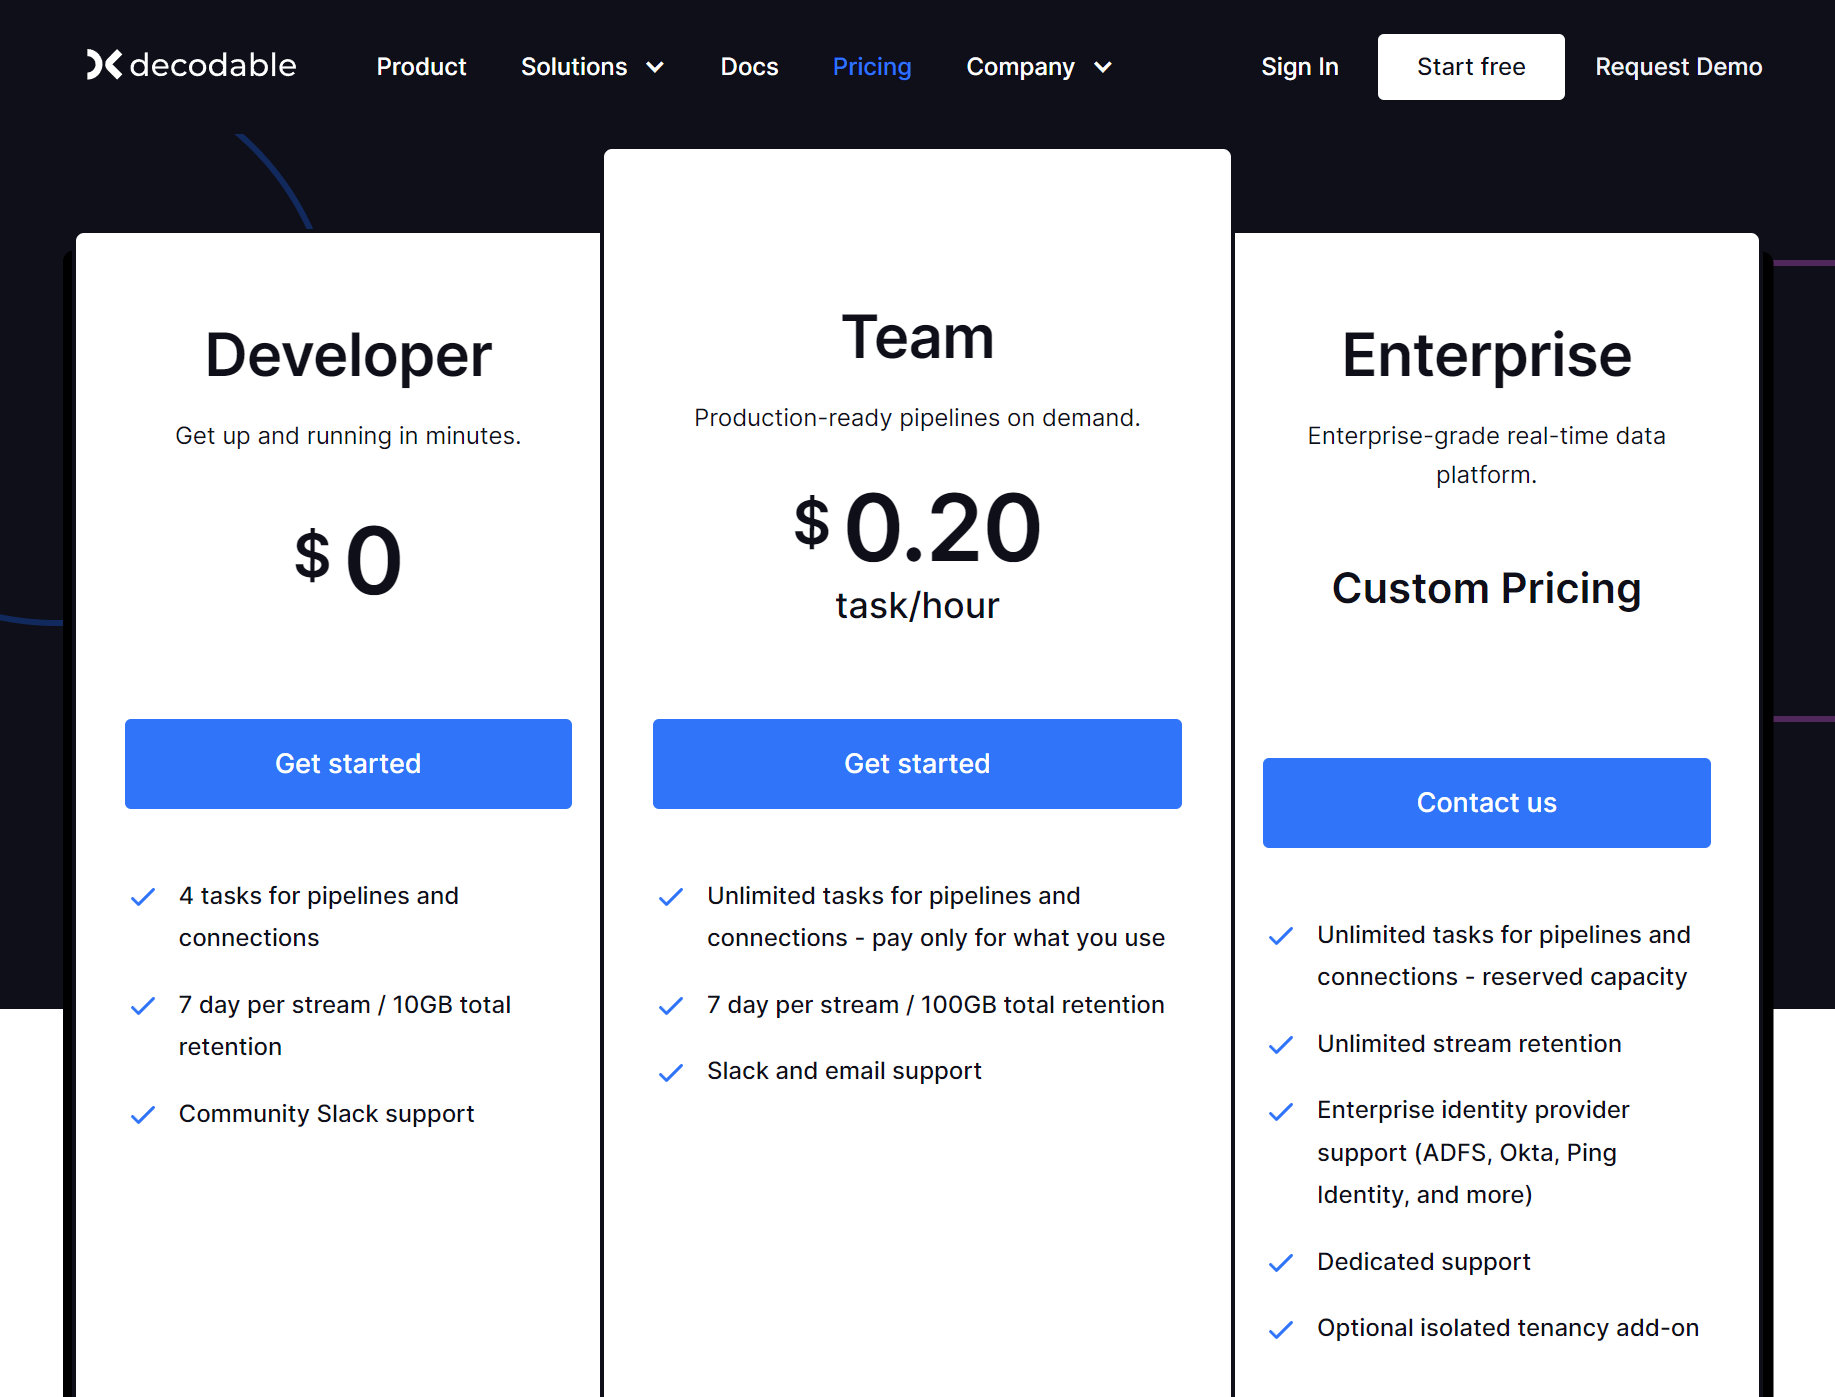 Pricing page